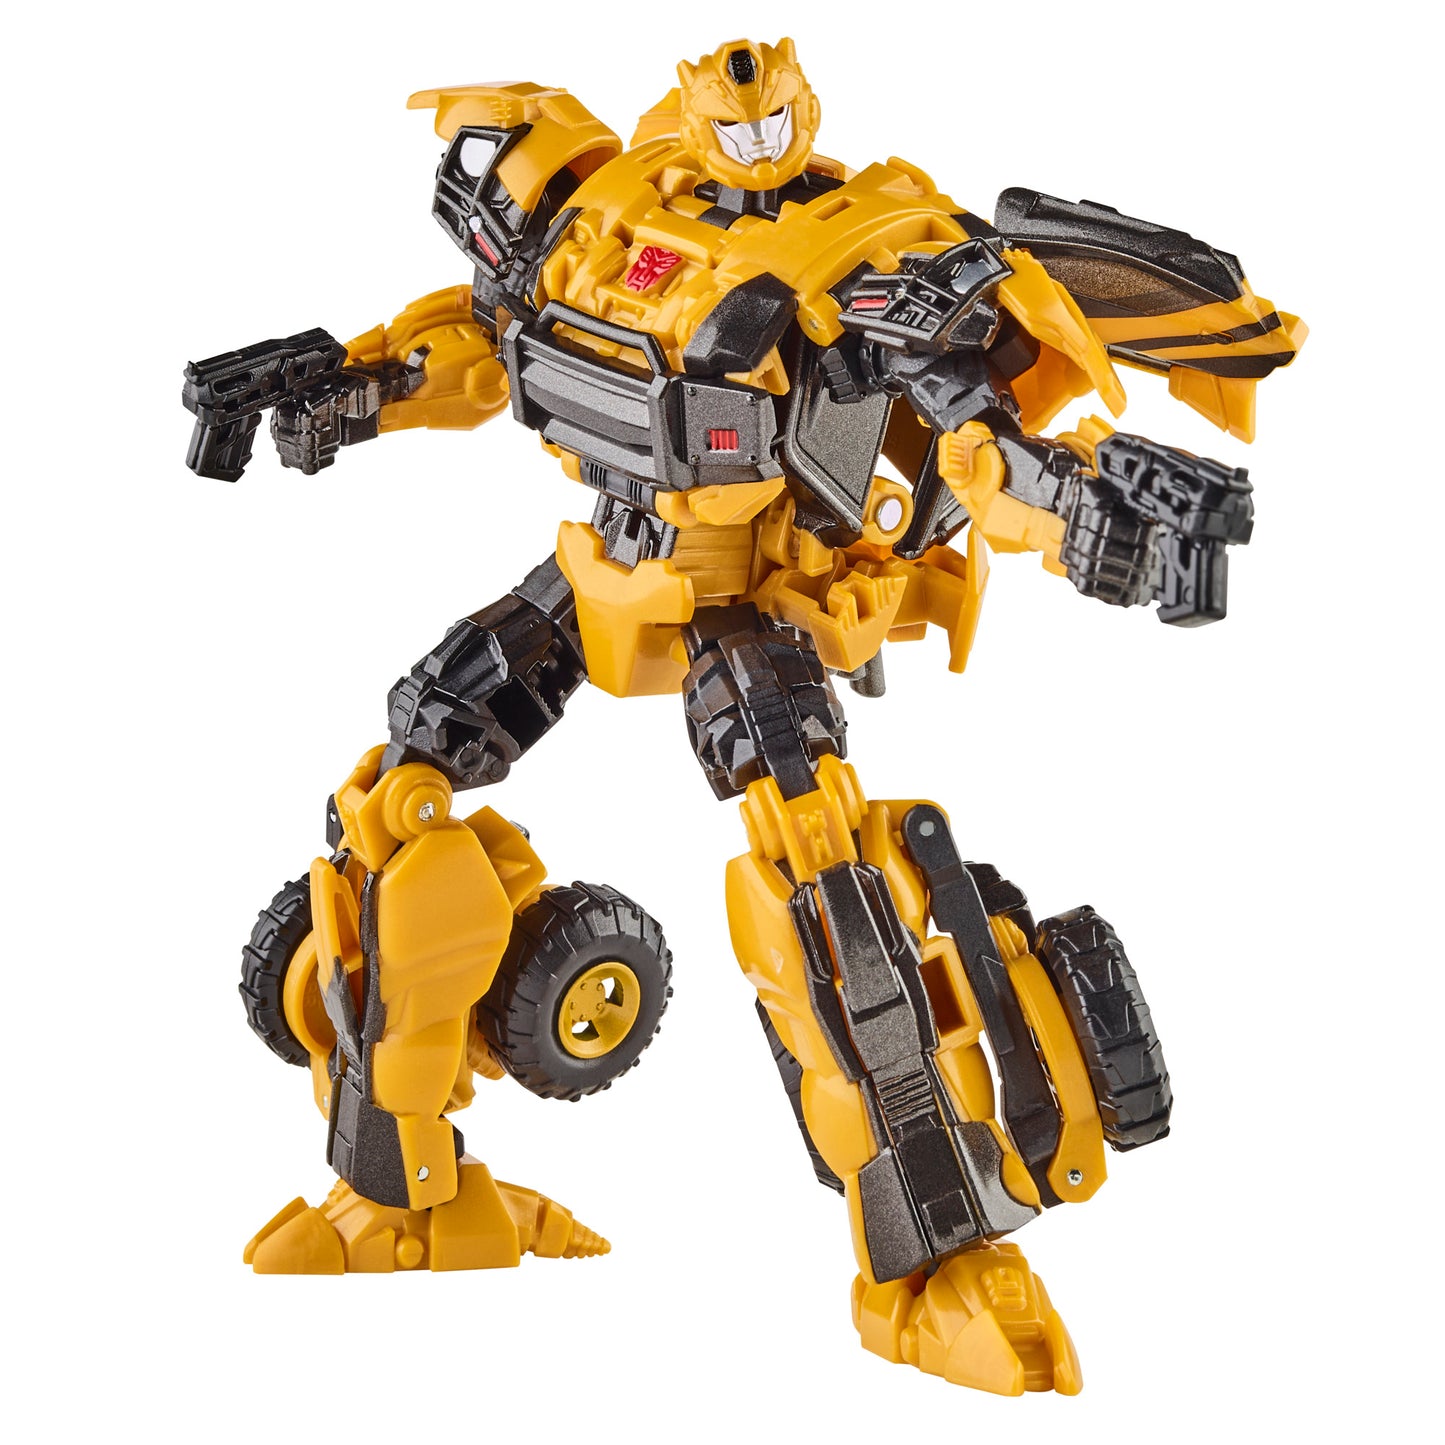 Transformers: Reactivate Video Game-Inspired Bumblebee and Starscream Action Figures